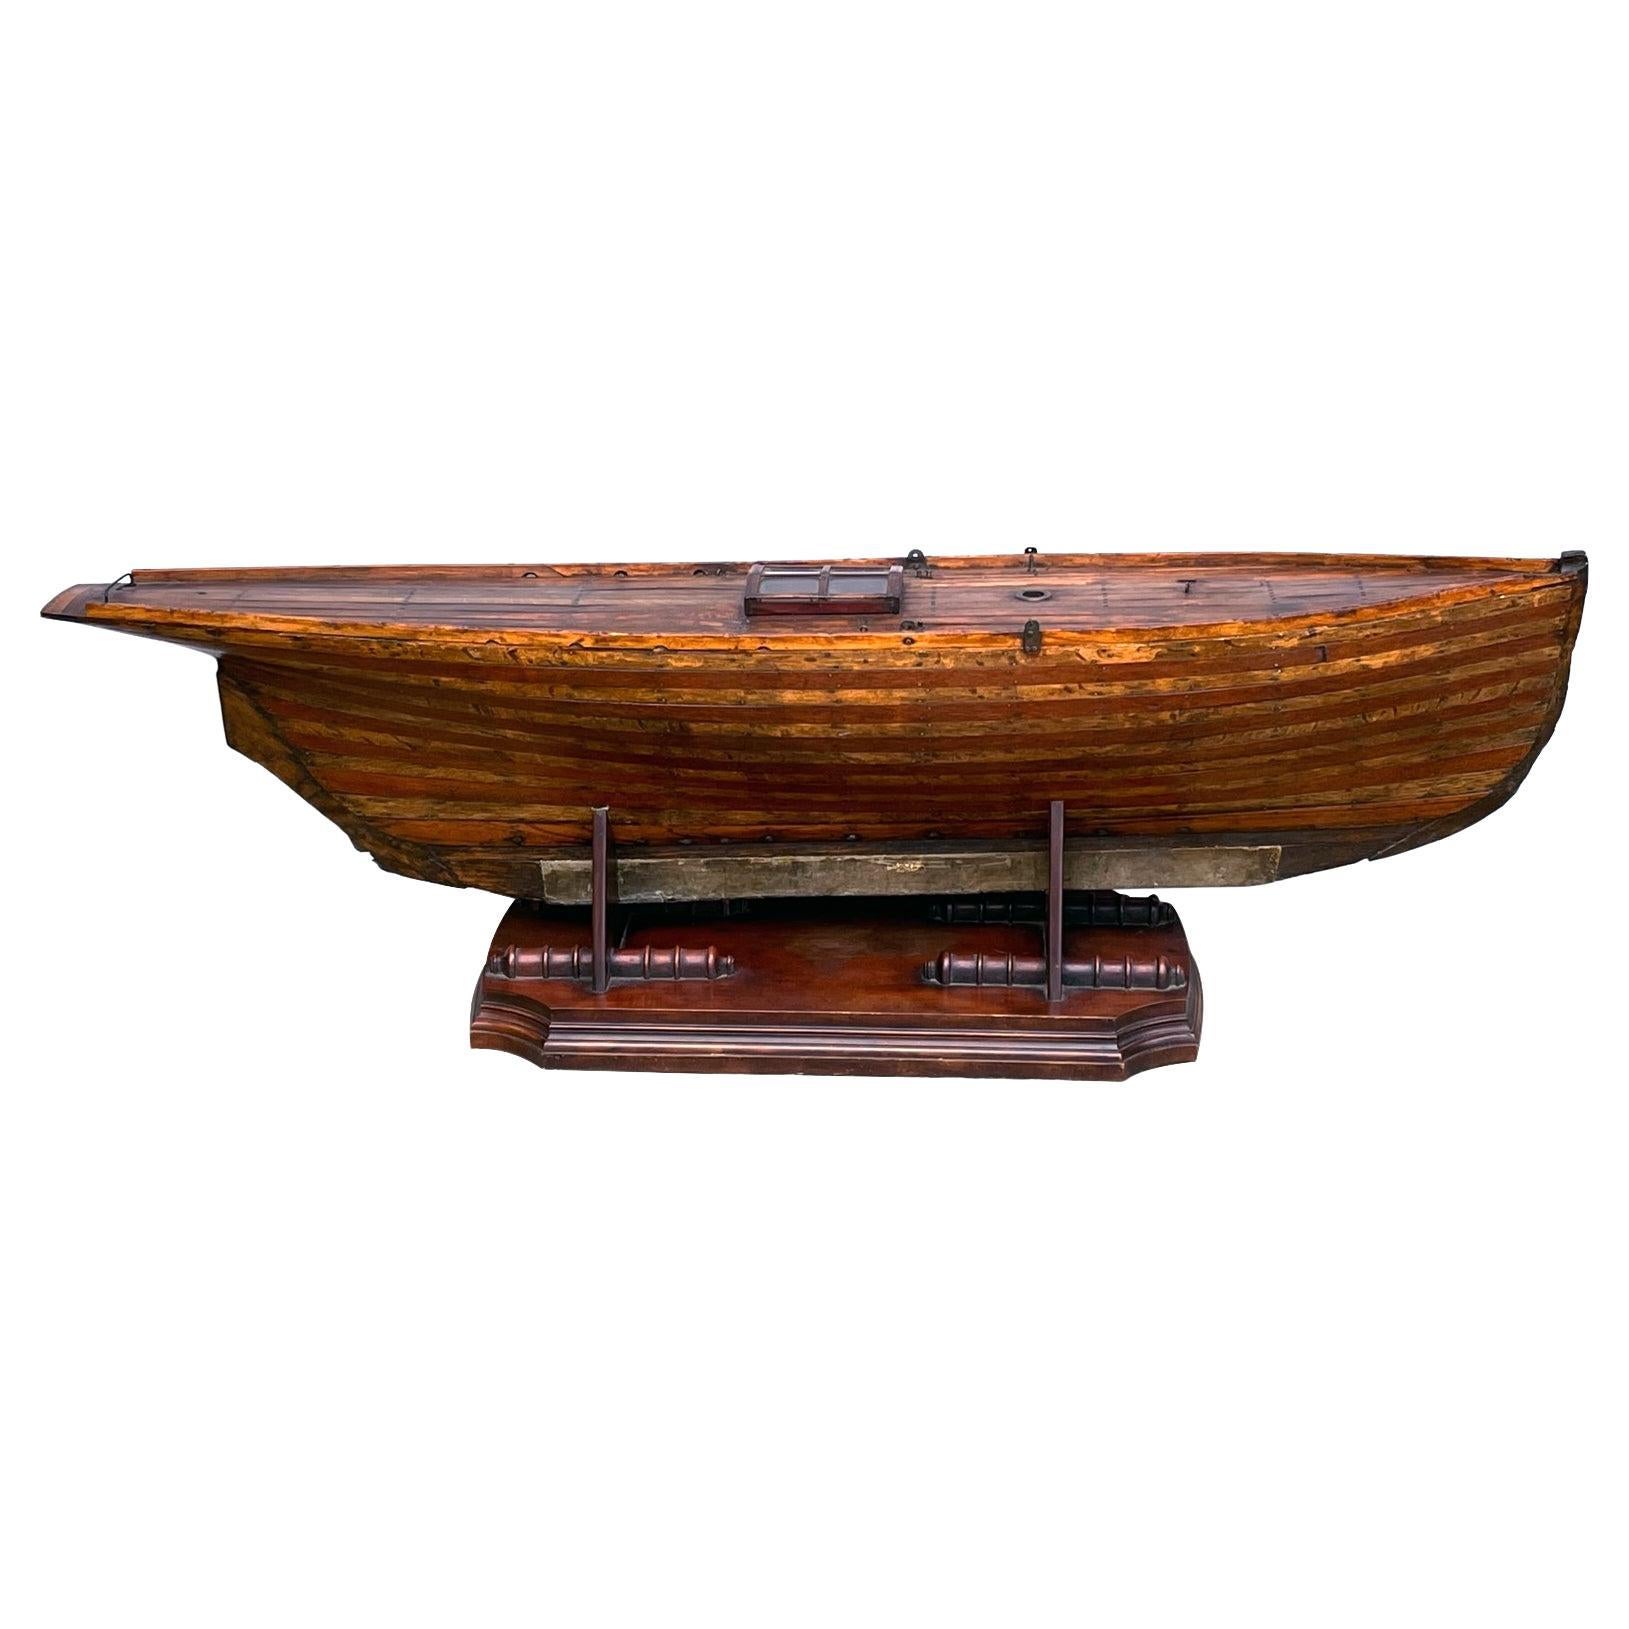 Large Late 19th Century Ship Model or Pond Yacht Hull For Sale